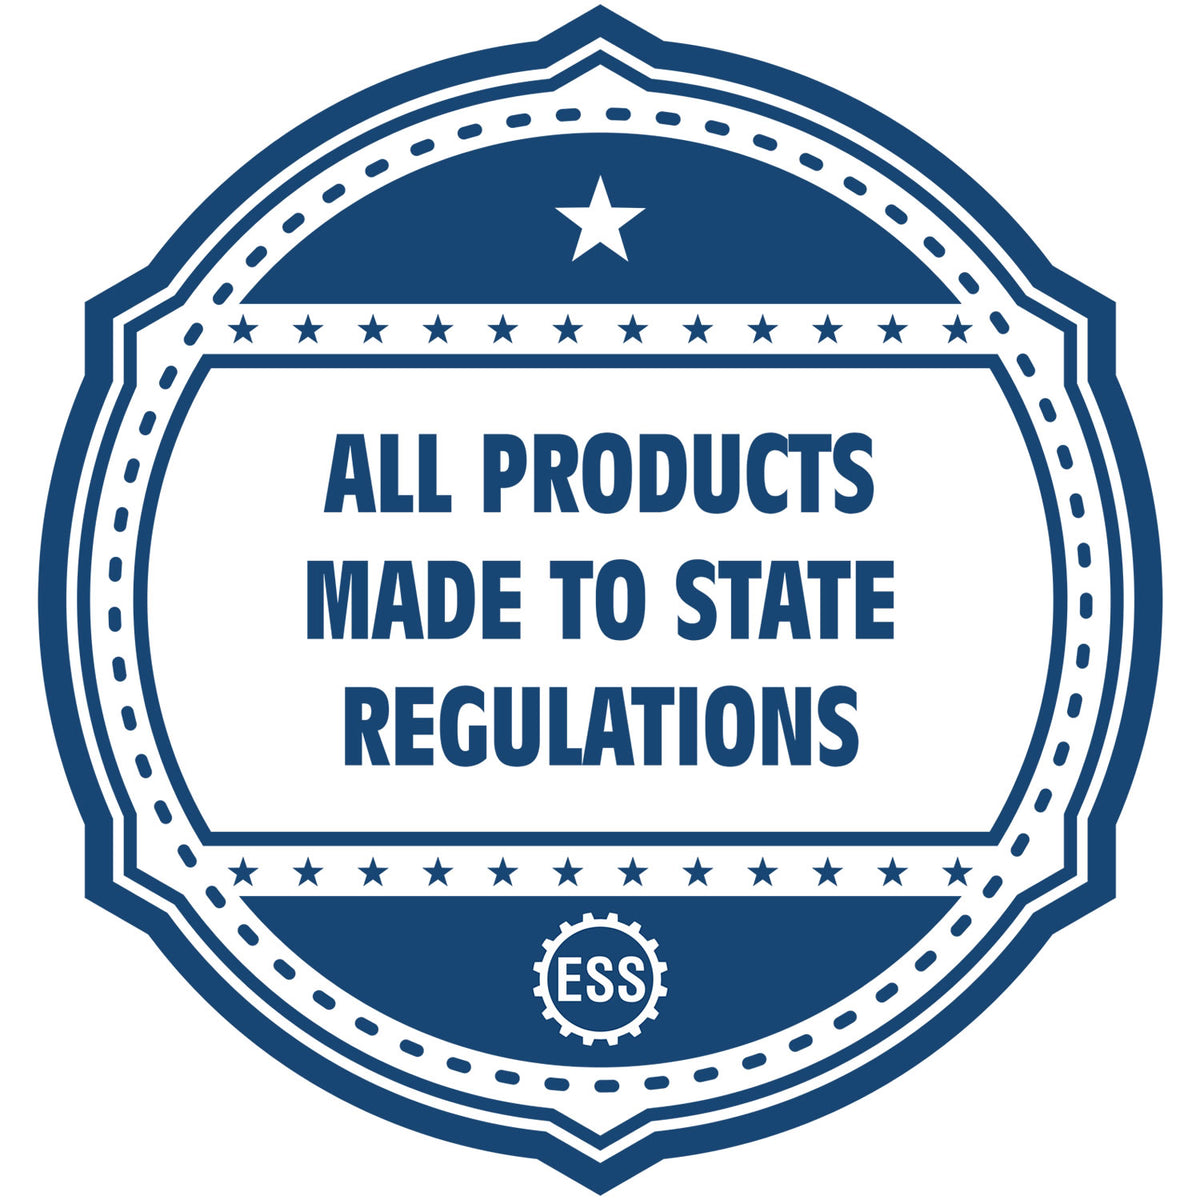 An icon or badge element for the Heavy-Duty Utah Rectangular Notary Stamp showing that this product is made in compliance with state regulations.